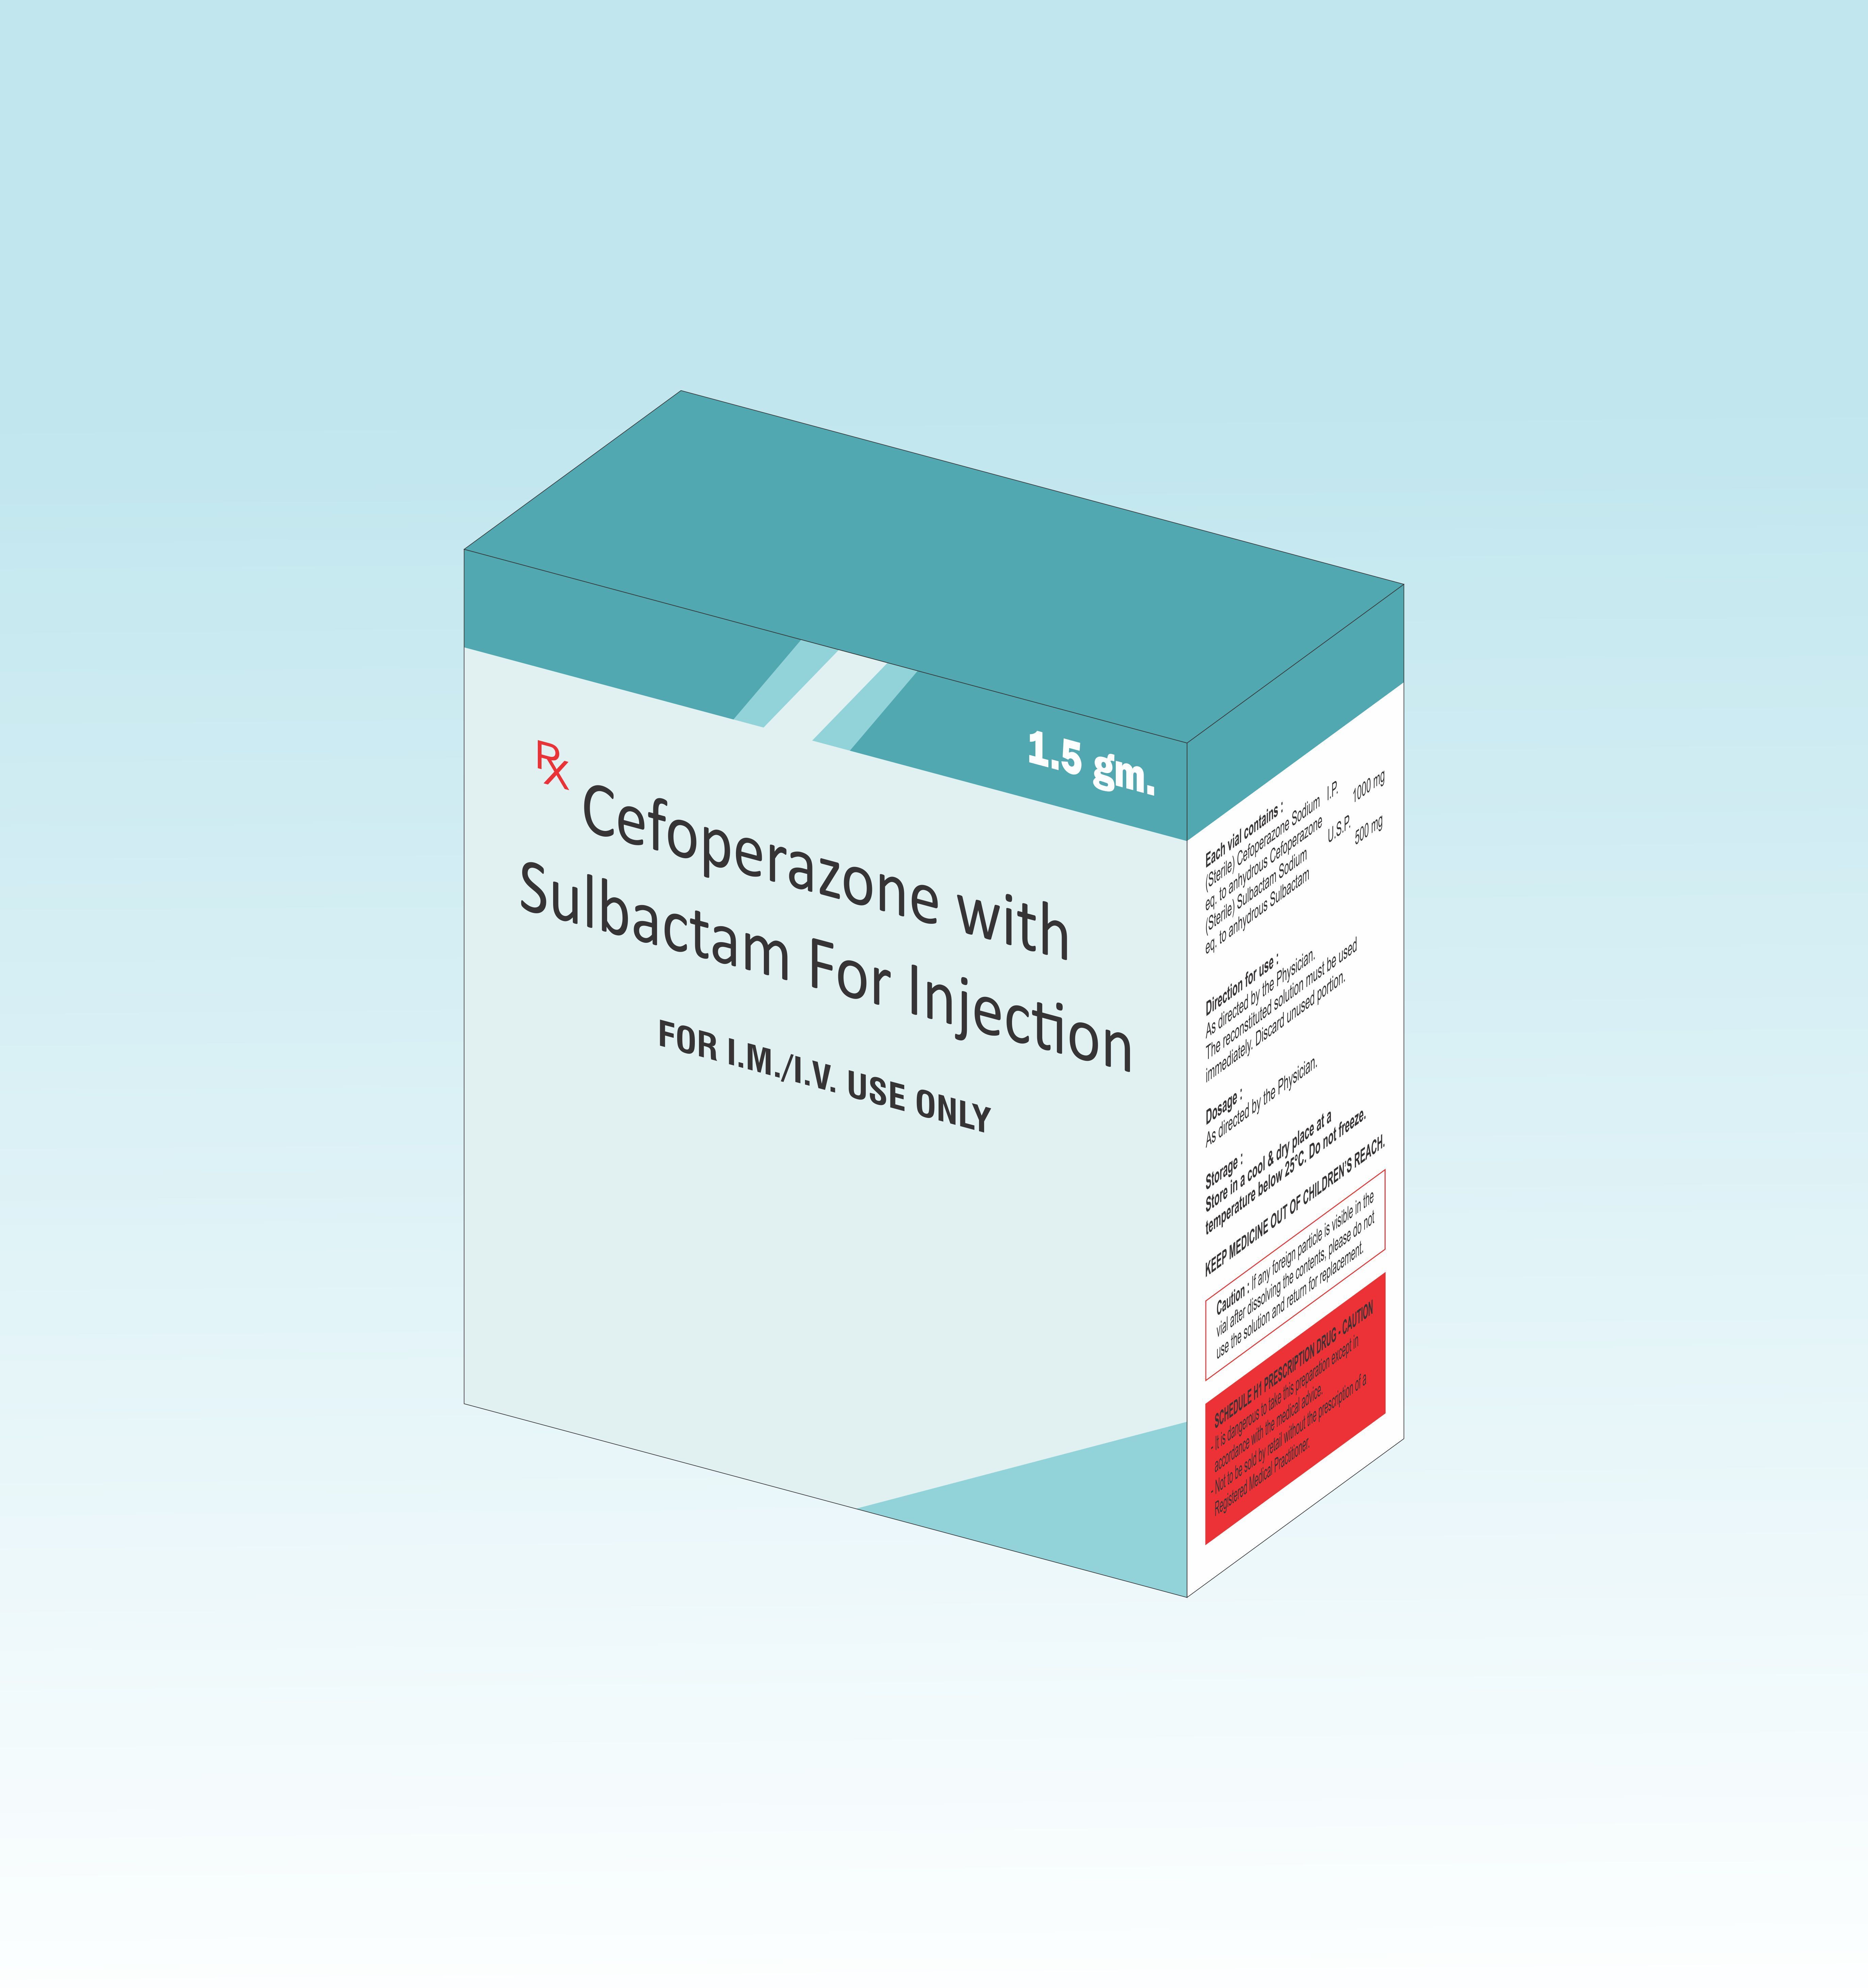 Ceftriaxone with Sulbactam Injection in Third party manufacturing